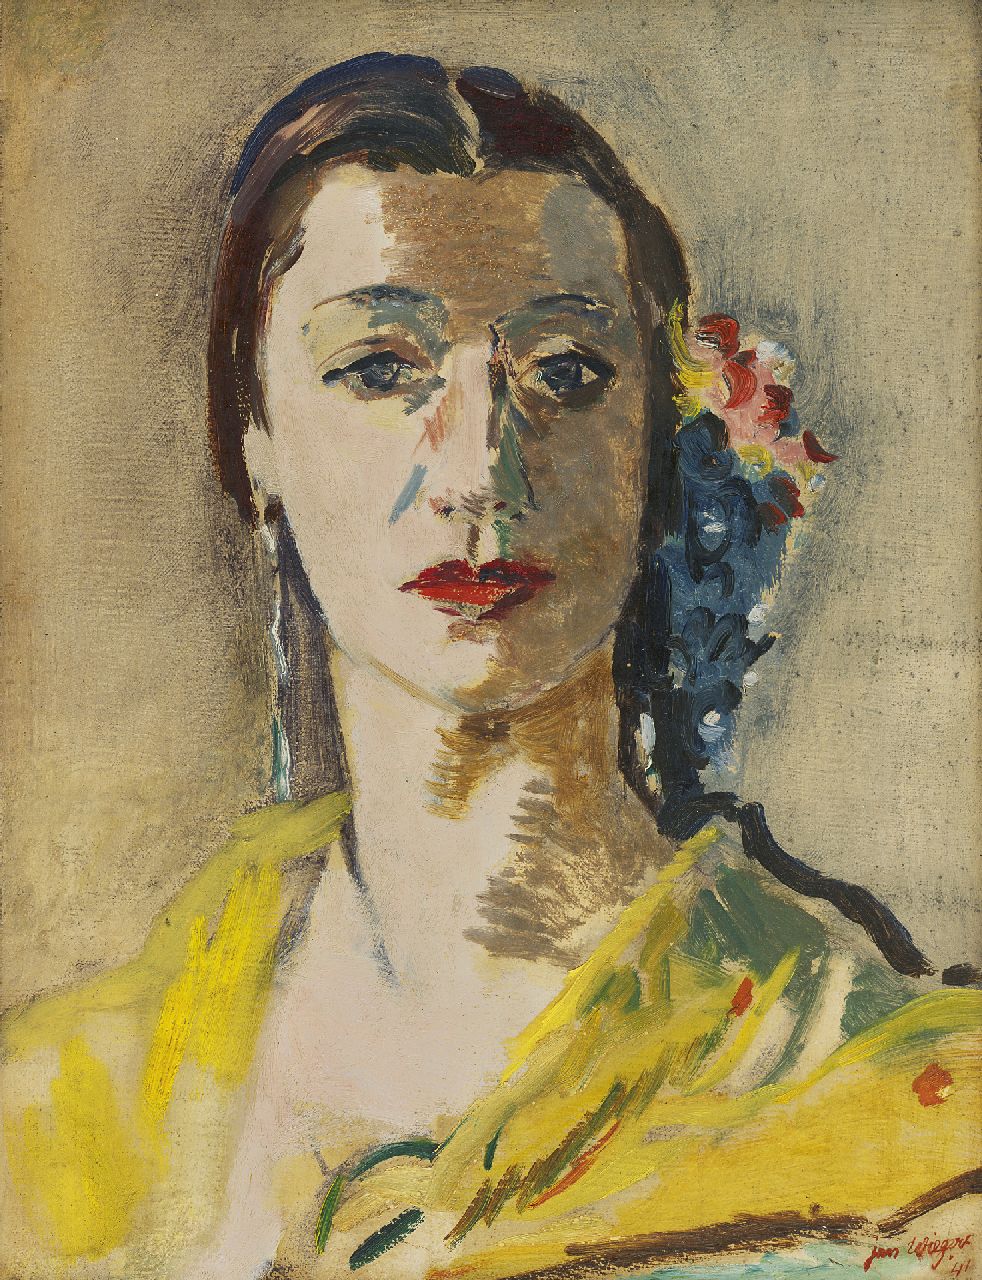 Wiegers J.  | Jan Wiegers, Female dancer, oil on canvas 40.4 x 30.4 cm, signed l.r. and dated '41